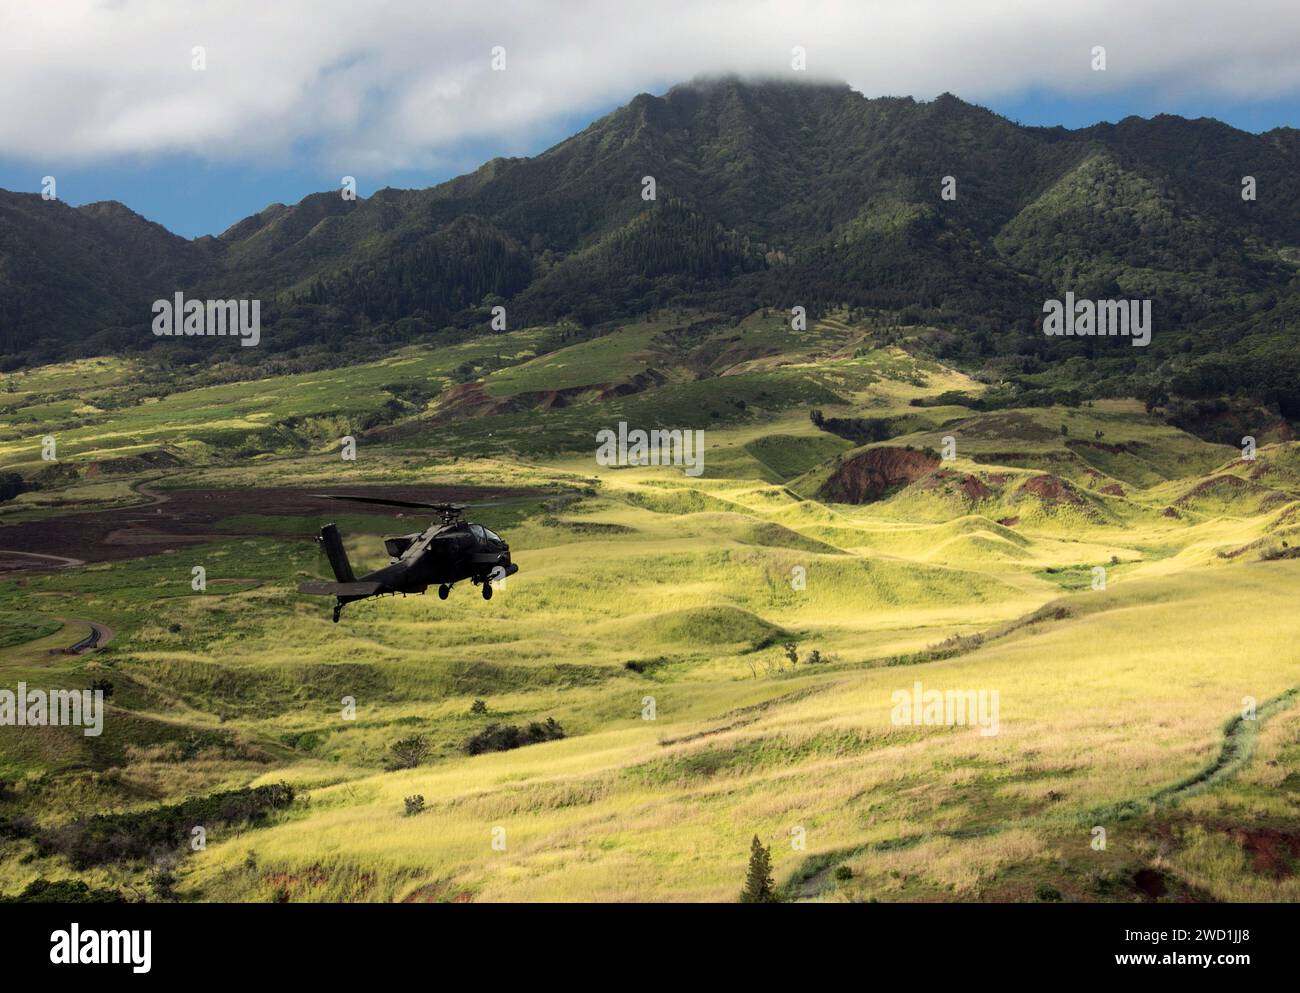 U.S. Army AH-64D Apache helicopter flies in formation over Schofield Barracks, Hawaii. Stock Photo